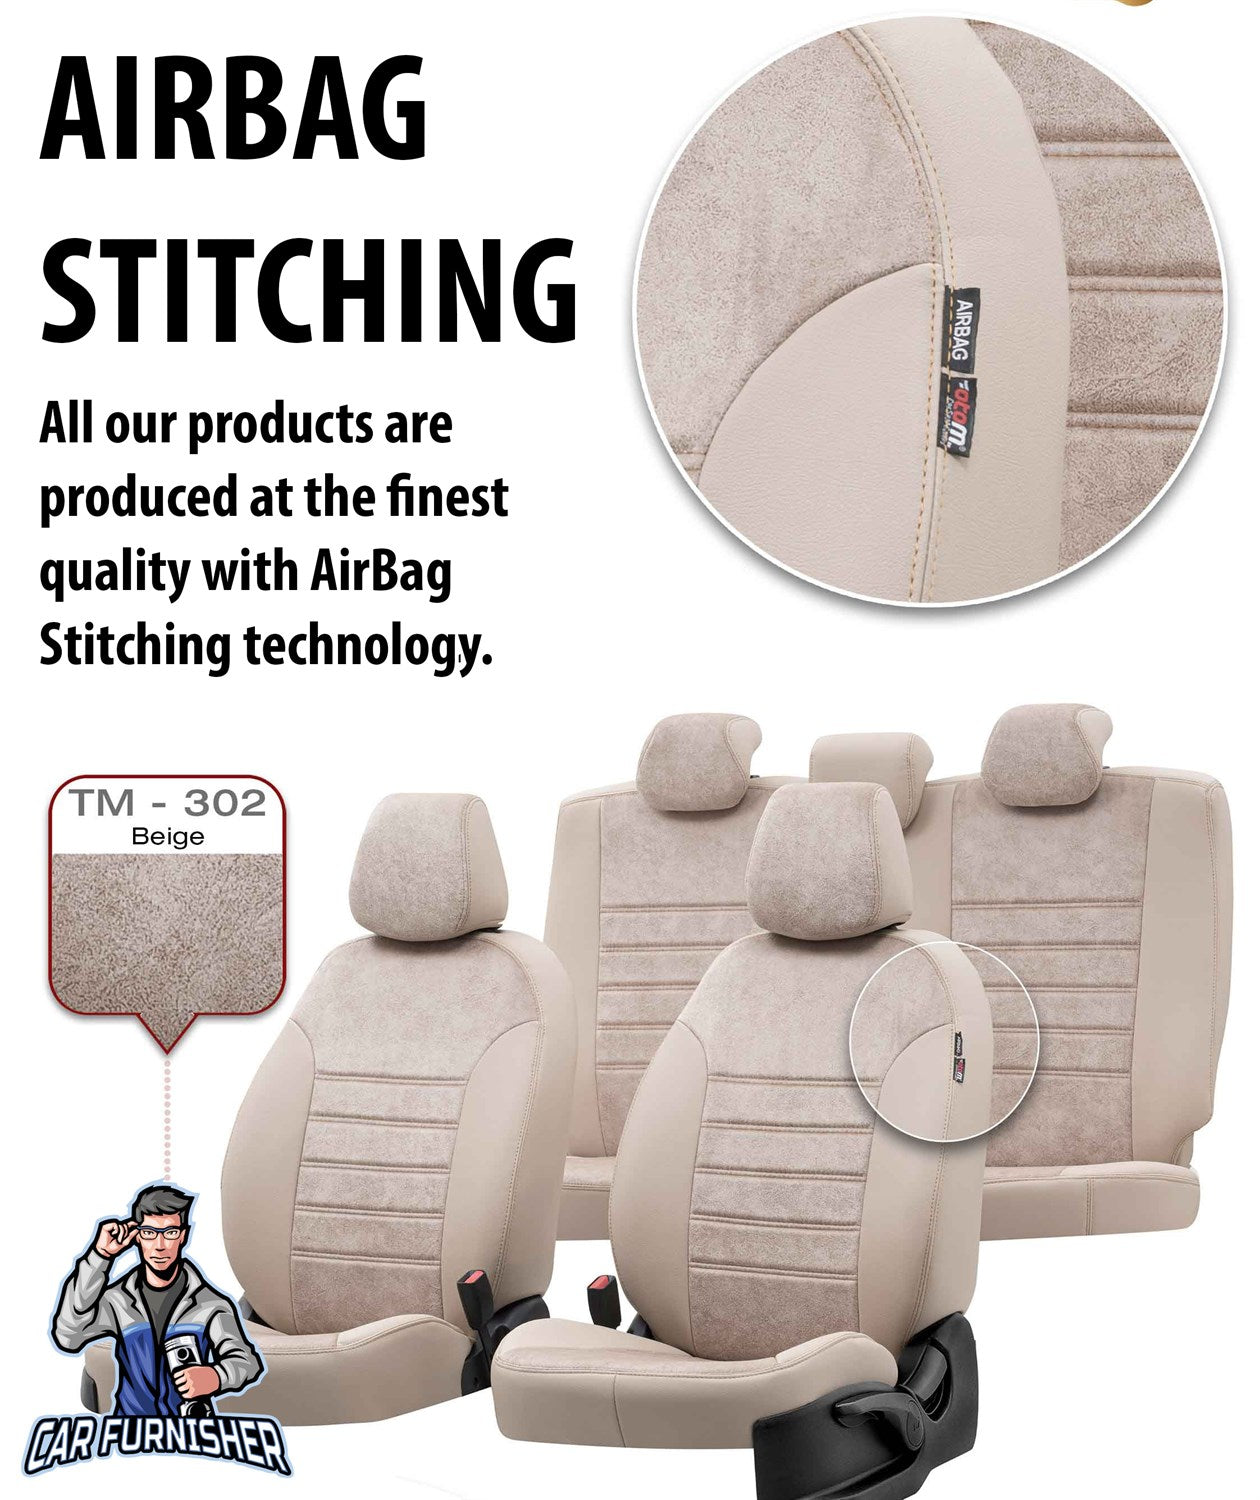 Kia Ceed Seat Covers Milano Suede Design Beige Leather & Suede Fabric